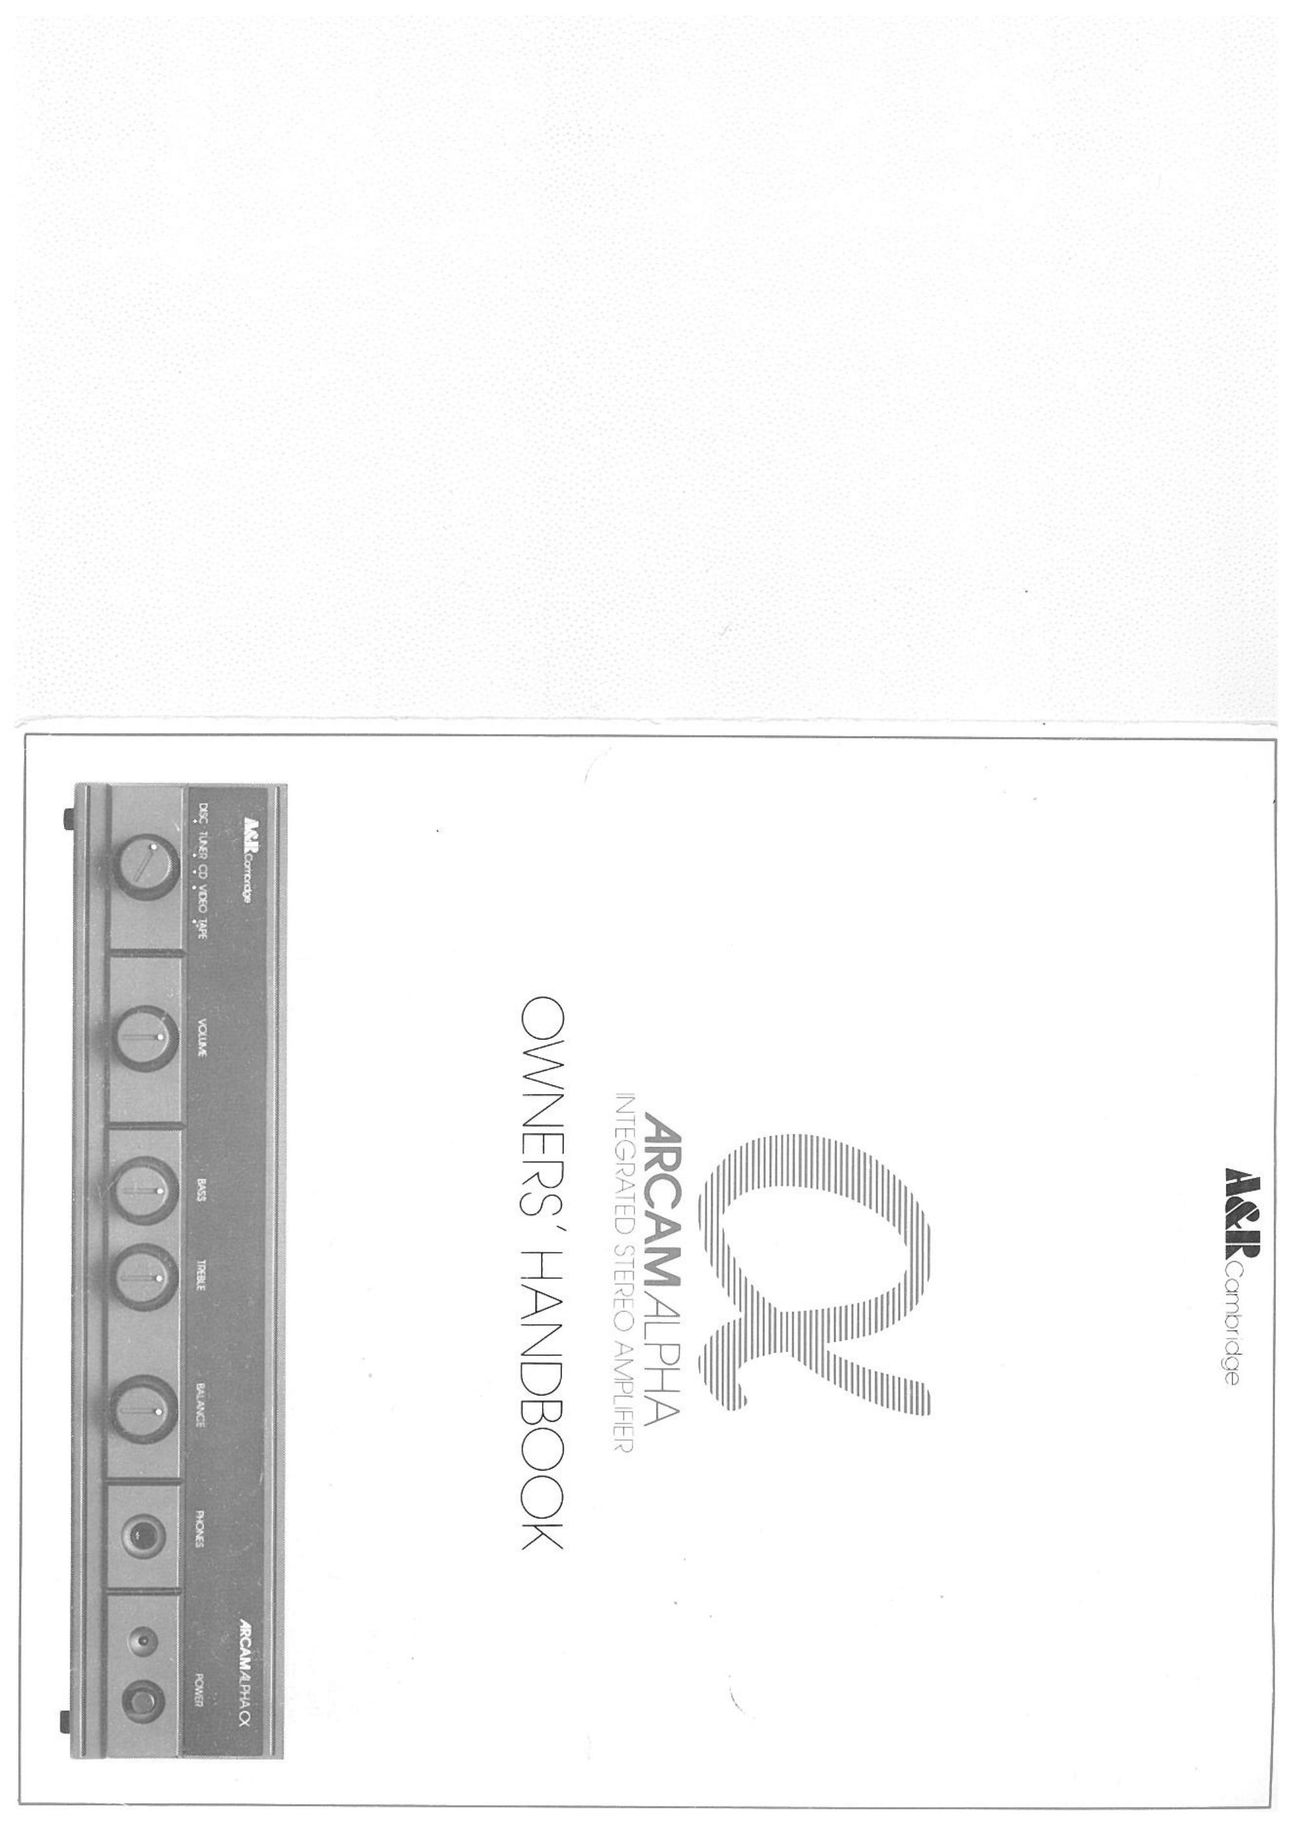 Arcam Integrated Stereo Amplifier Stereo Amplifier User Manual